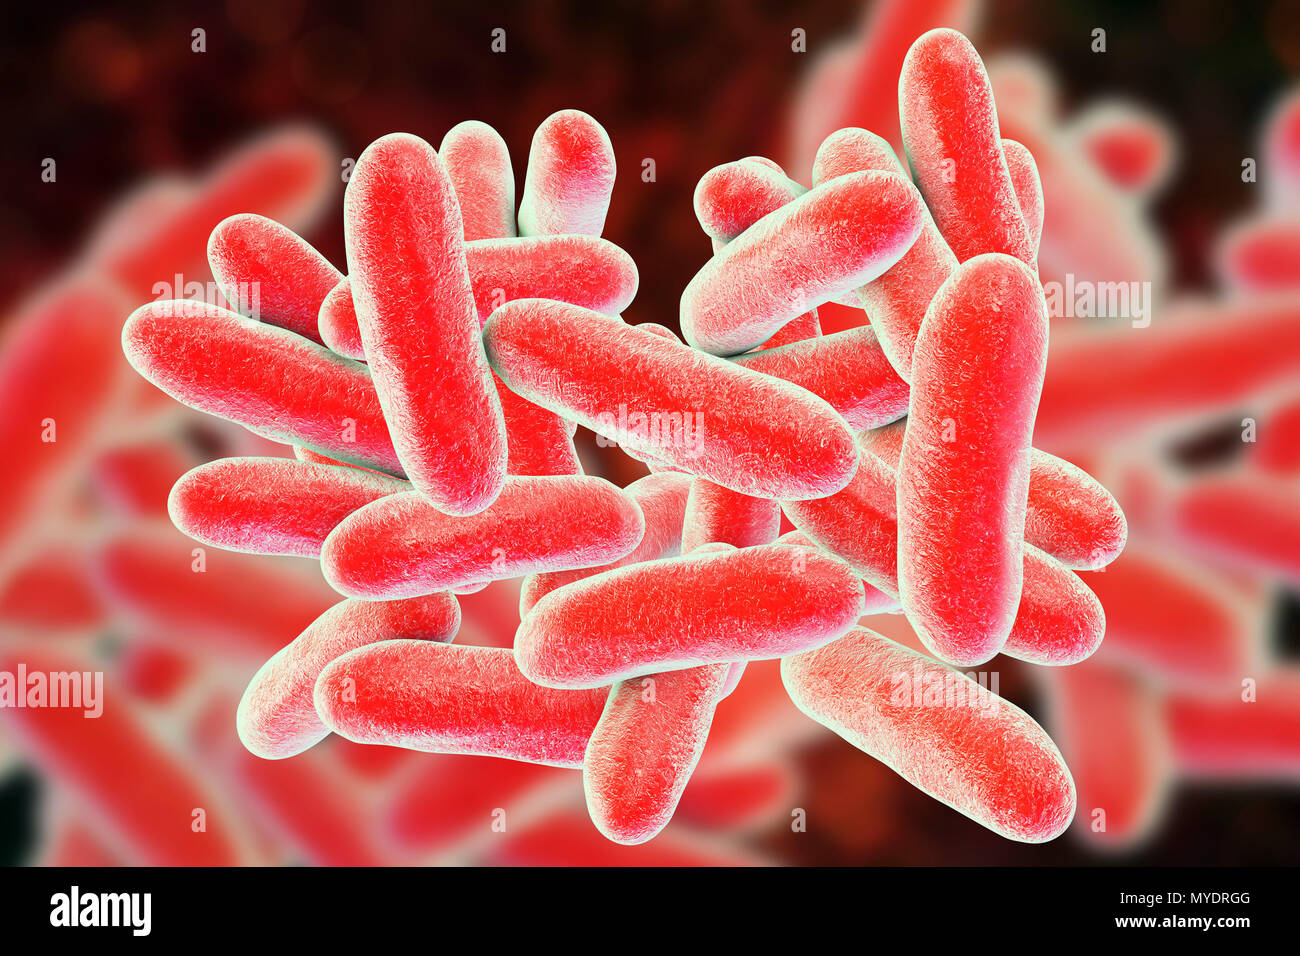 Legionnaires' disease bacteria. Computer illustration of Legionella pneumophila bacteria, the cause of Legionnaires' disease. These bacilli (rod-shaped bacteria) are Gram-negative. L. pneumophila was identified as a pathogen (agent of disease) after a mysterious outbreak of pneumonia caused 29 deaths at an American Legion convention in 1976. This bacterium was found living in water tanks, showerheads and air-conditioning systems. The disease causes fatal pneumonic lung damage in the elderly and unfit. Stock Photo